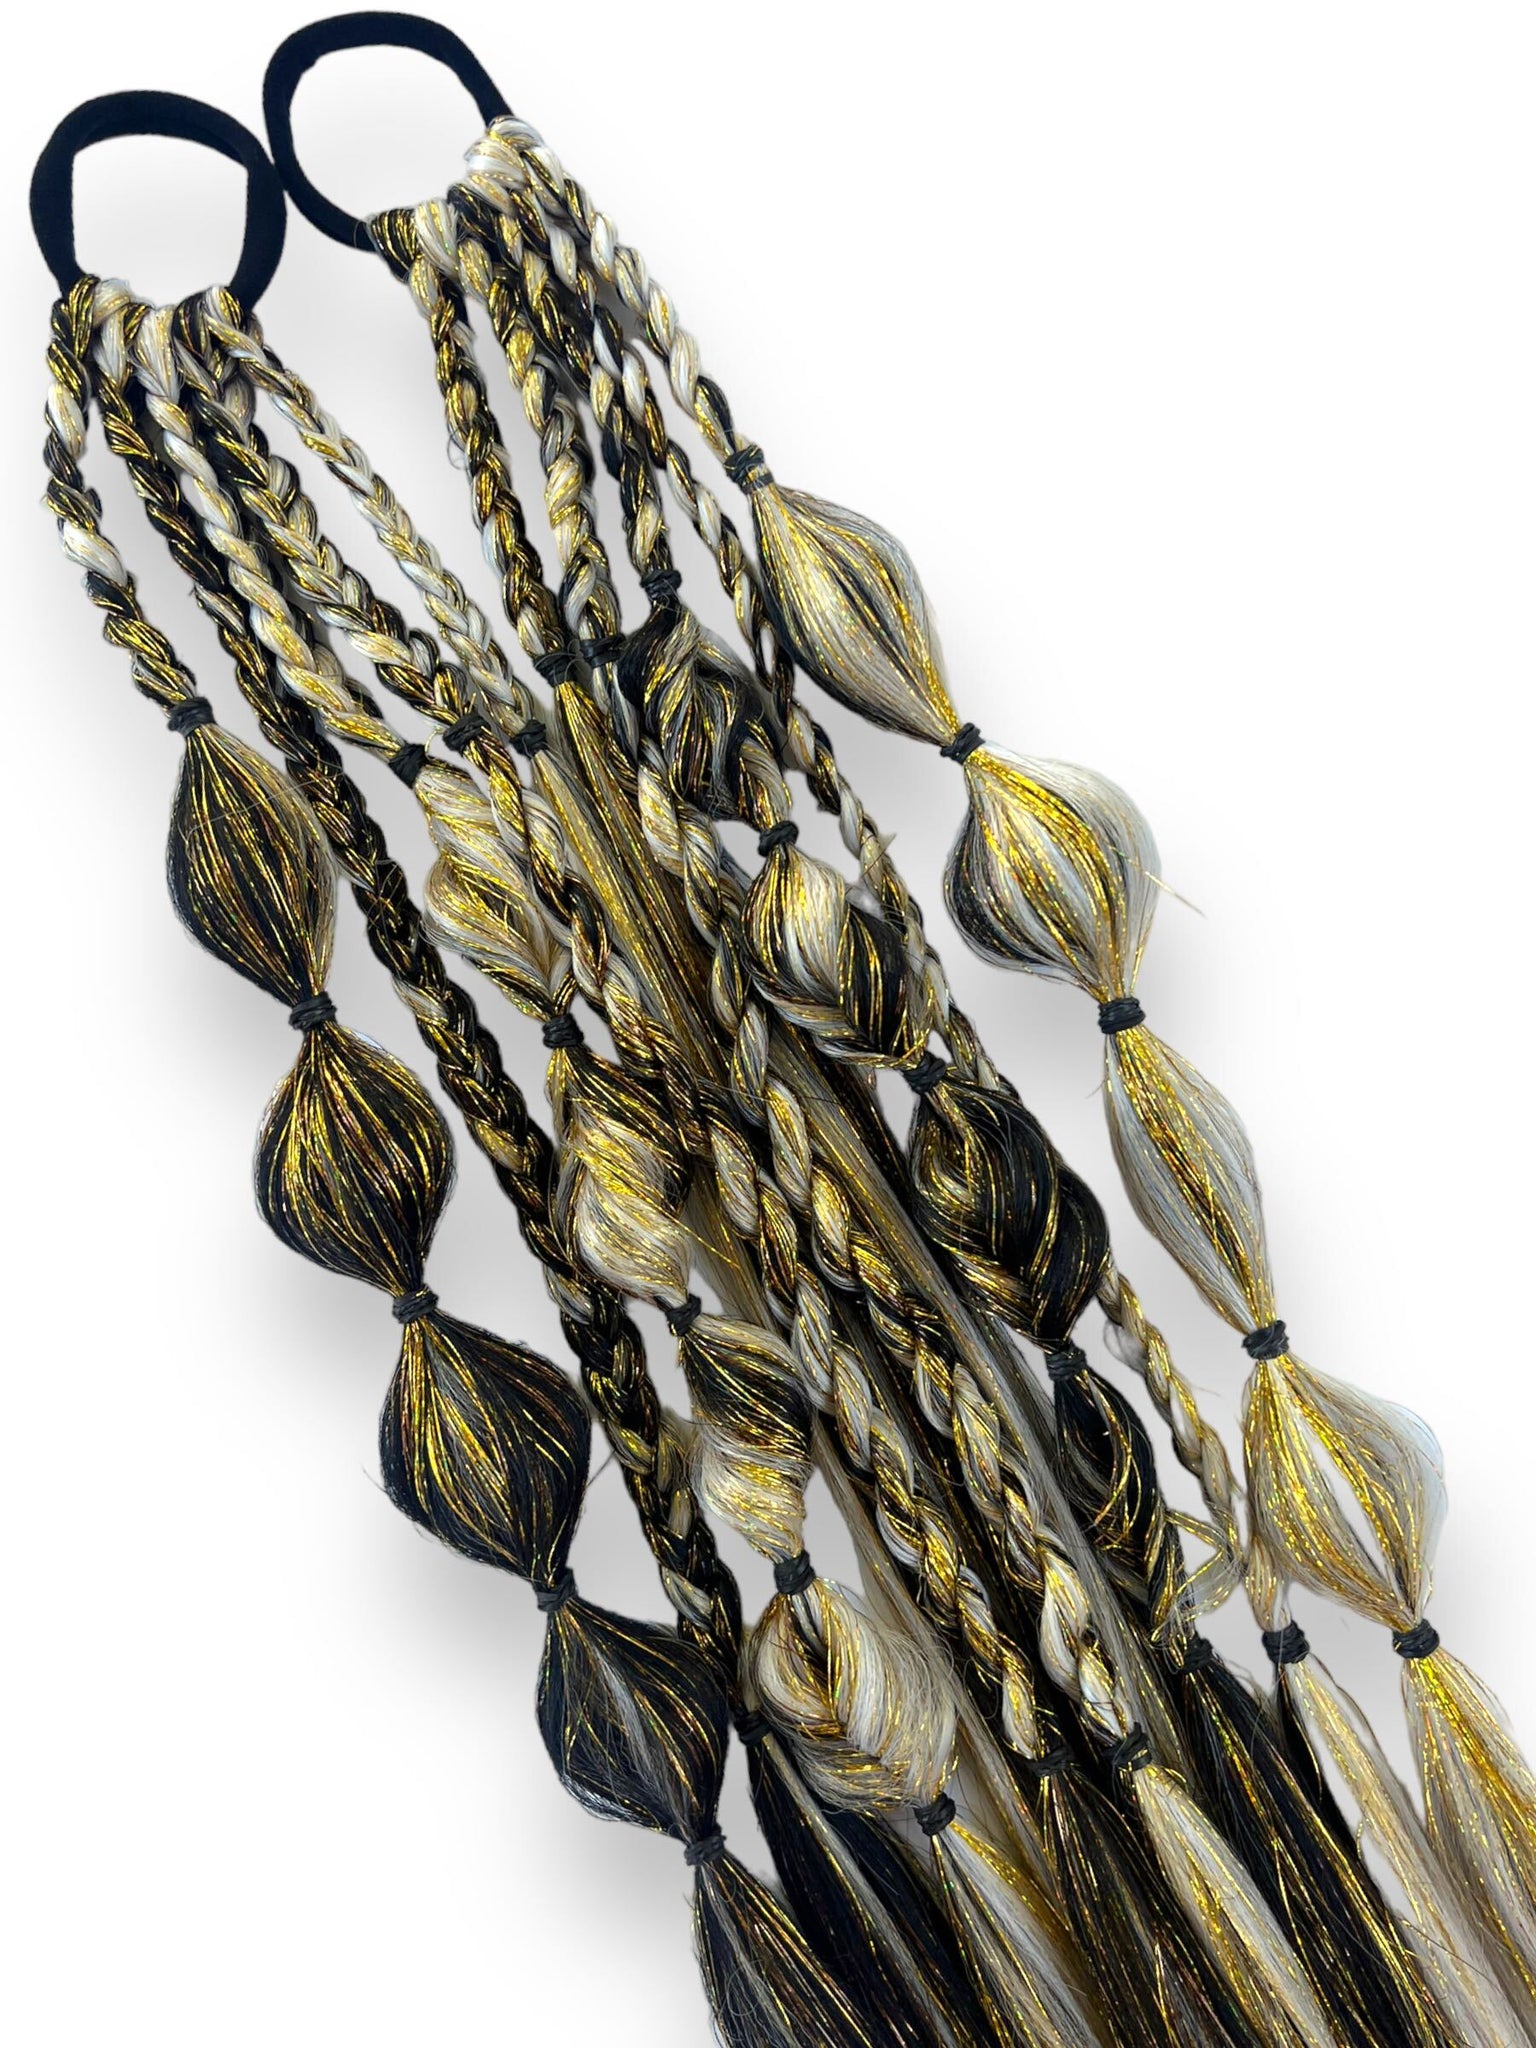 Black & Gold SPORTS - Tie-In Braid Extension Set of 2